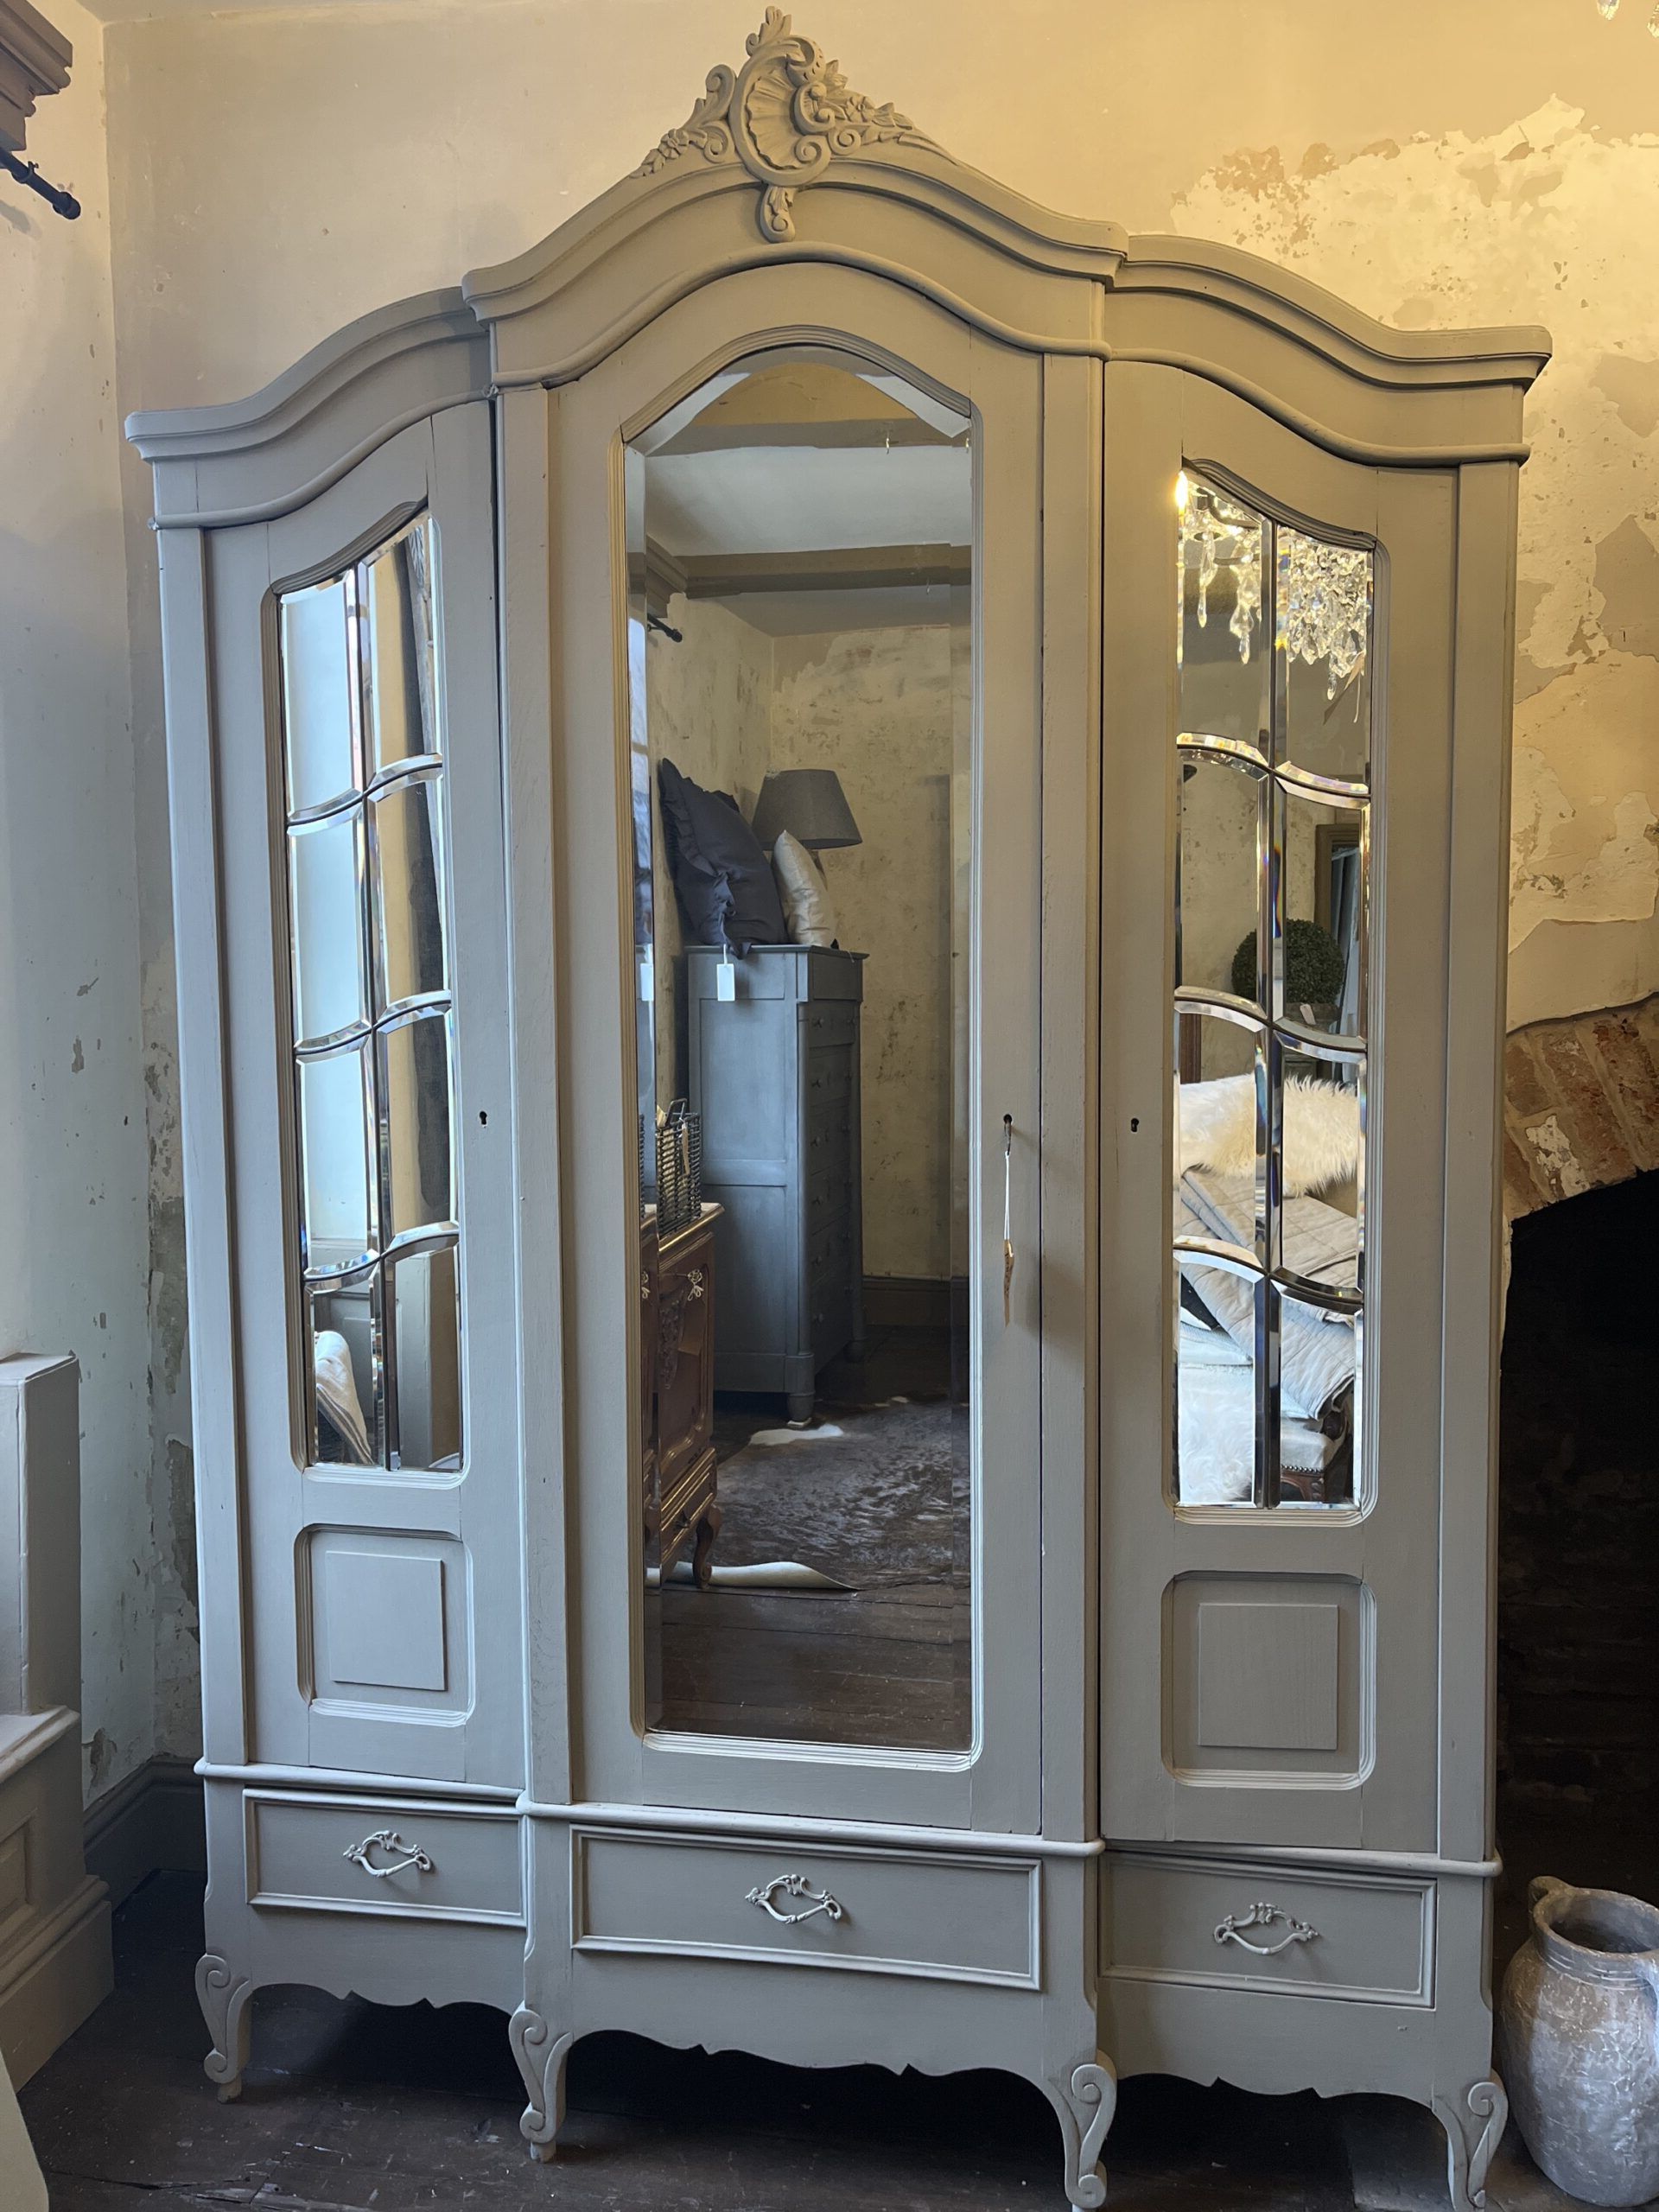 Armoires – Wardrobes – Vitrines | Village Chic Regarding French Armoire Wardrobes (Gallery 13 of 20)